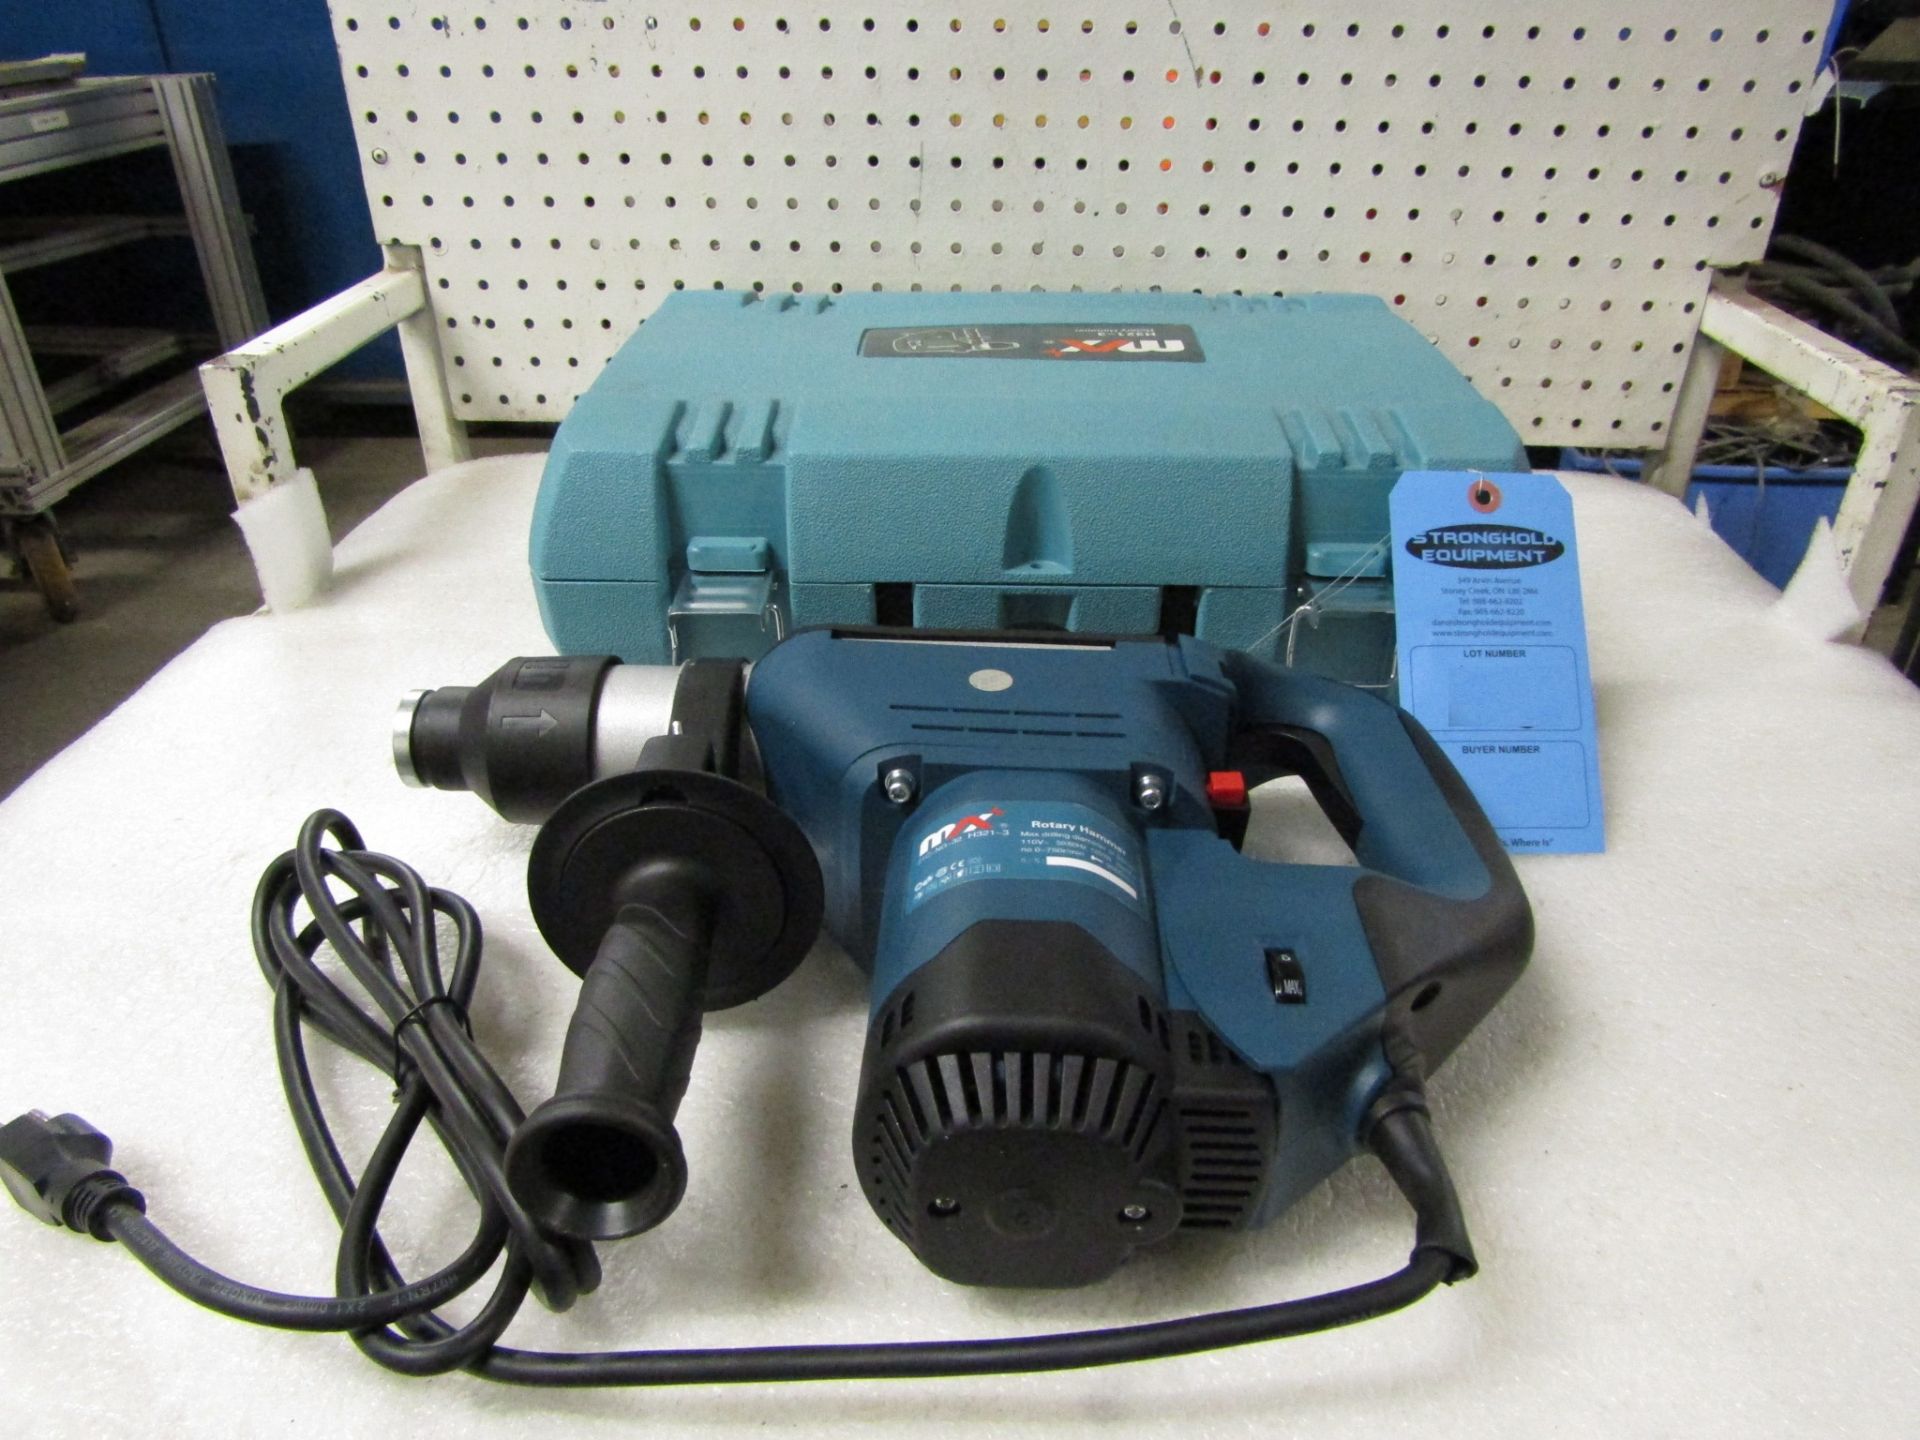 BRAND NEW Max Electric Rotary Hammer unit with 32mm / 1.25" max drilling diameter - model H-321